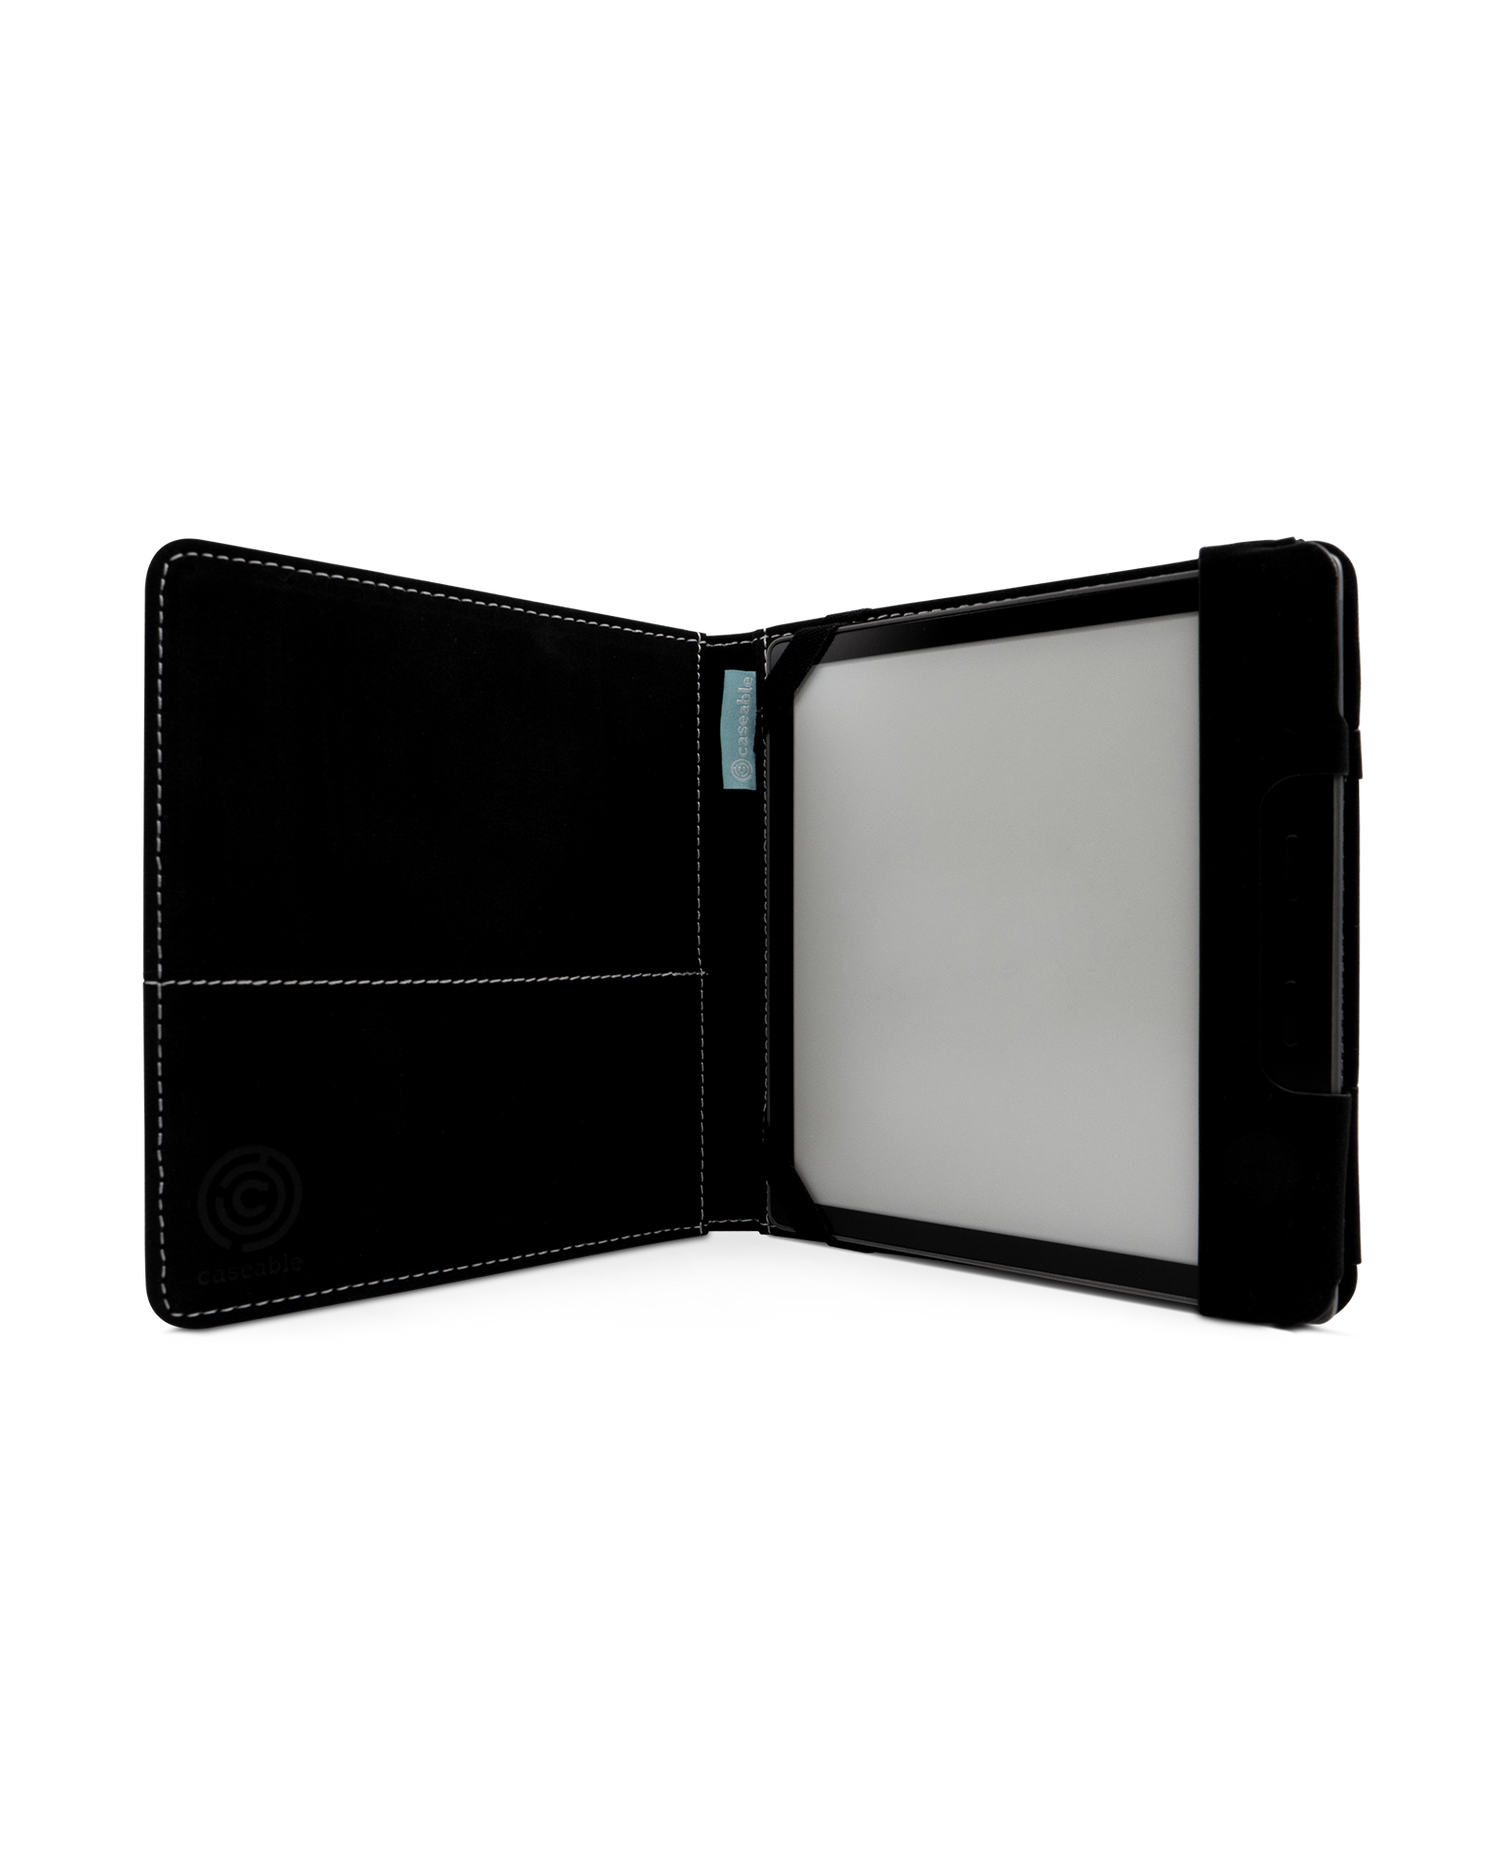 Oxford eReader Case for tolino vision 6: Opened interior view